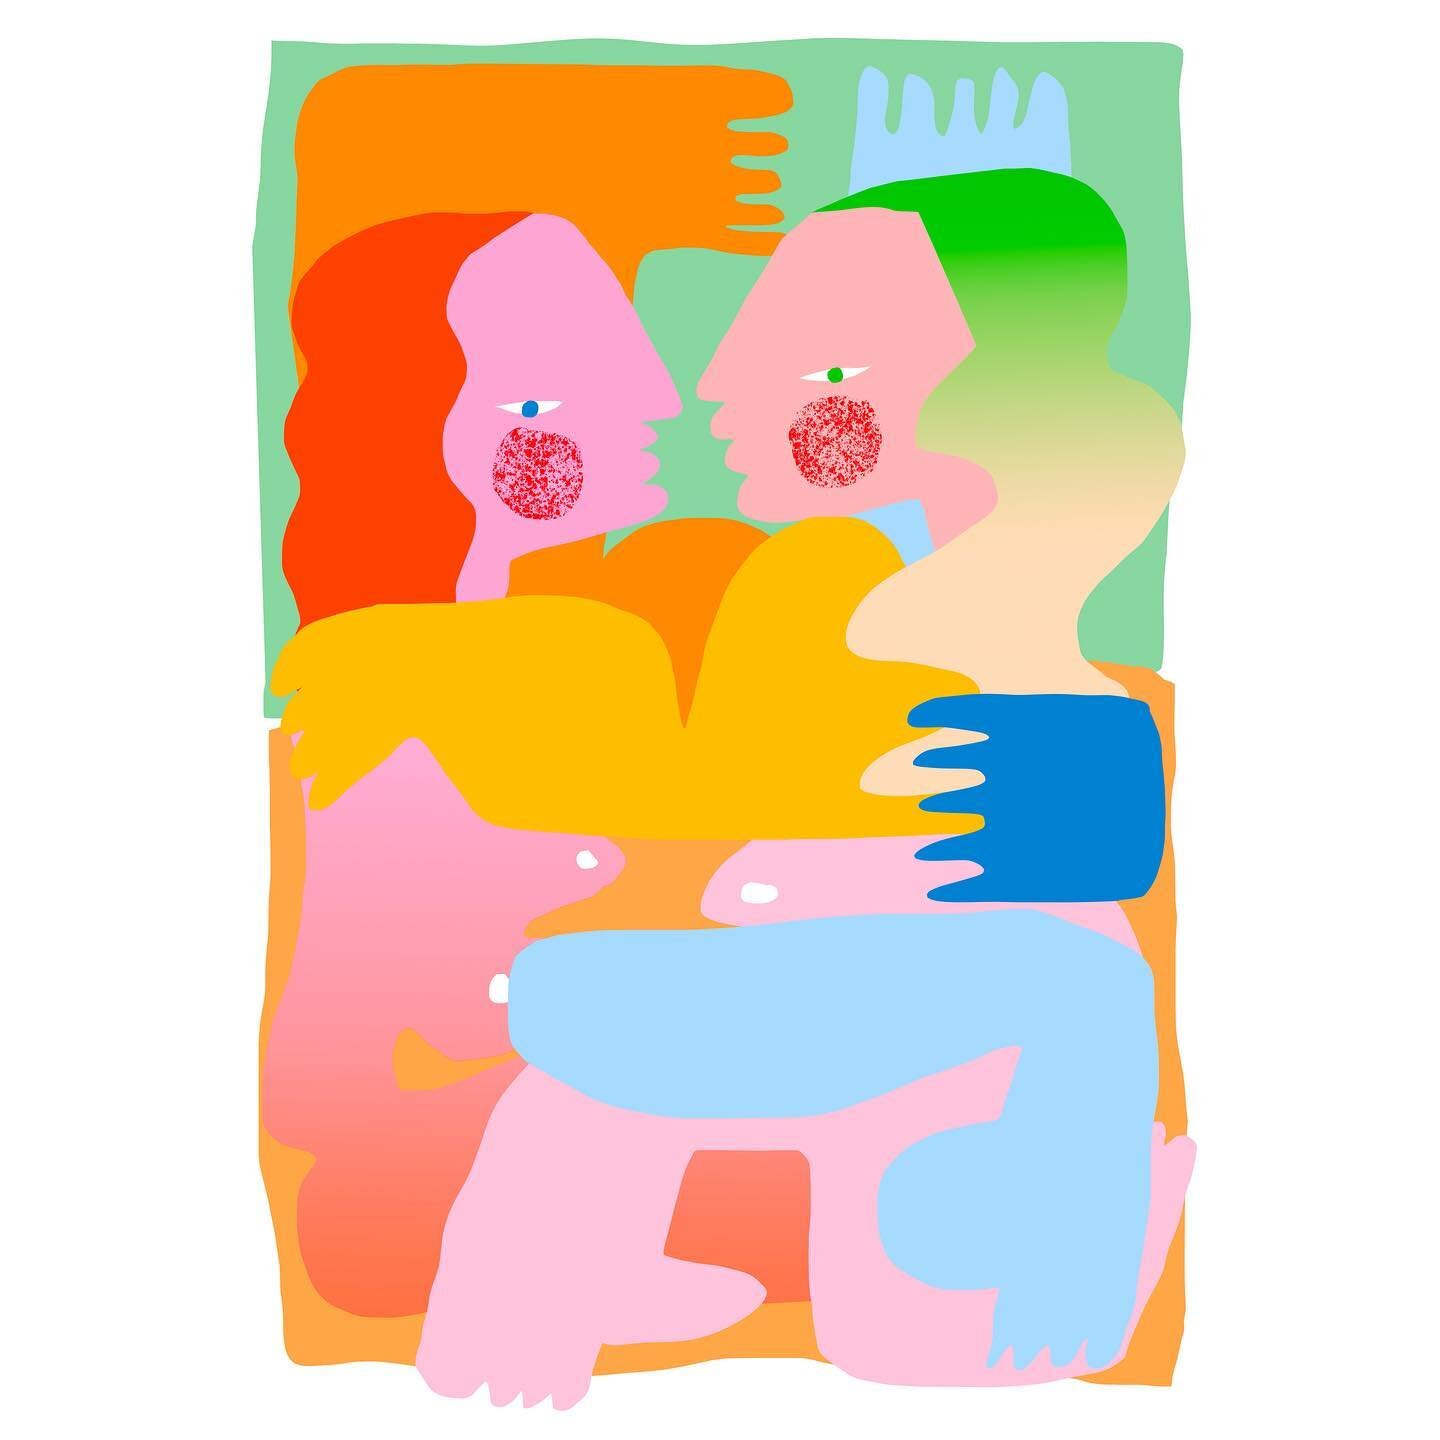 A special commission for a special babe on a special Birthday.

#art #drawing #print #printmaker #maker #artist #designer #gradient #abstract #shape #babes #commission #lush